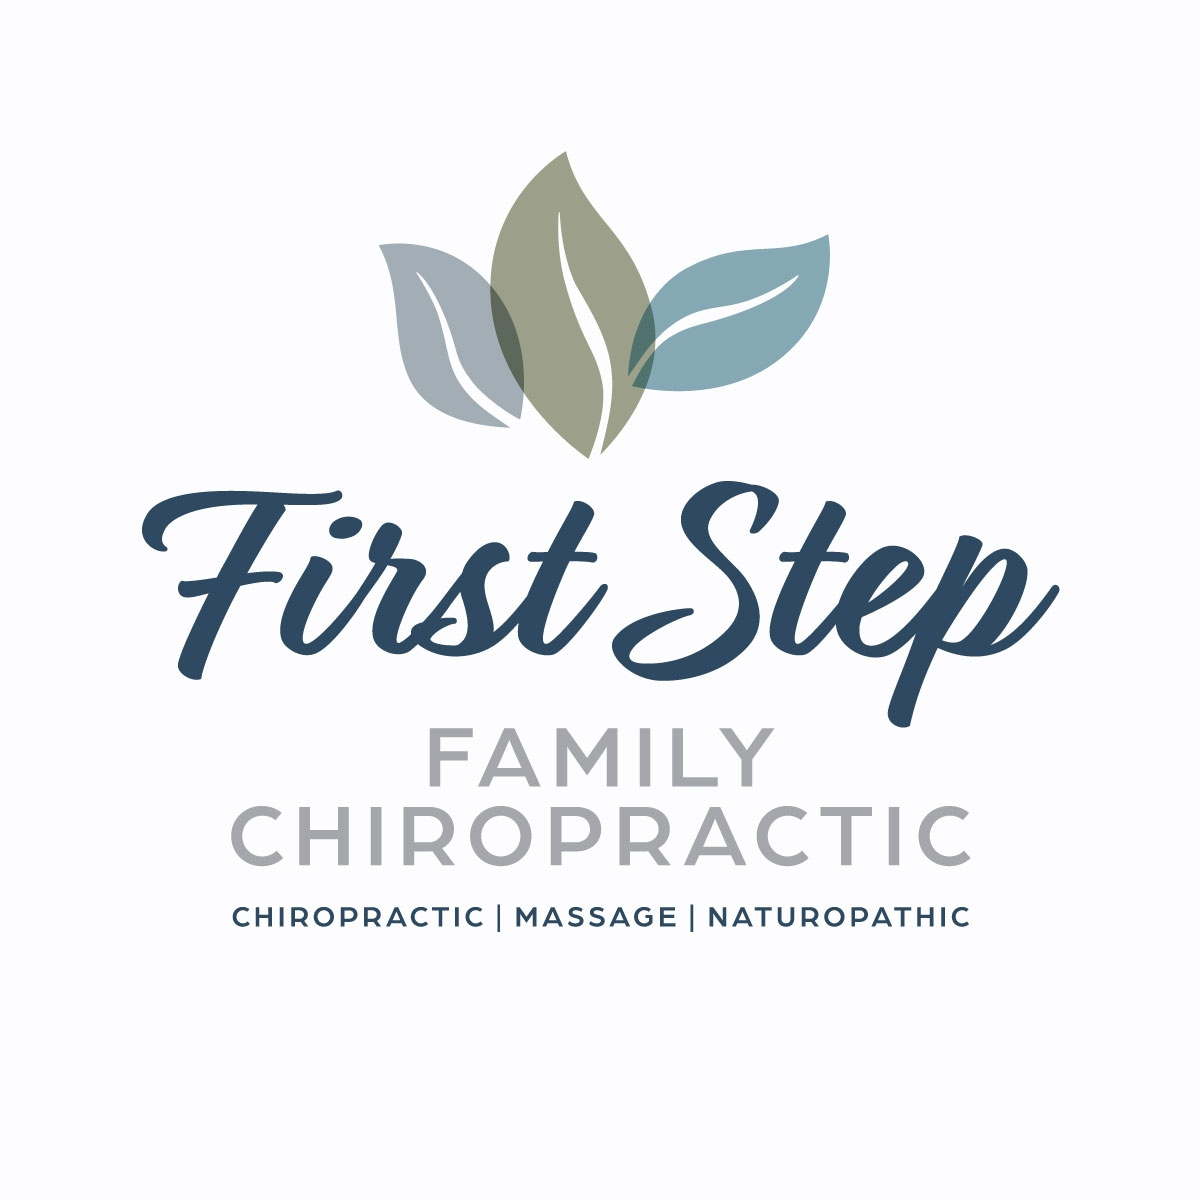 First Step Family Chiropractor